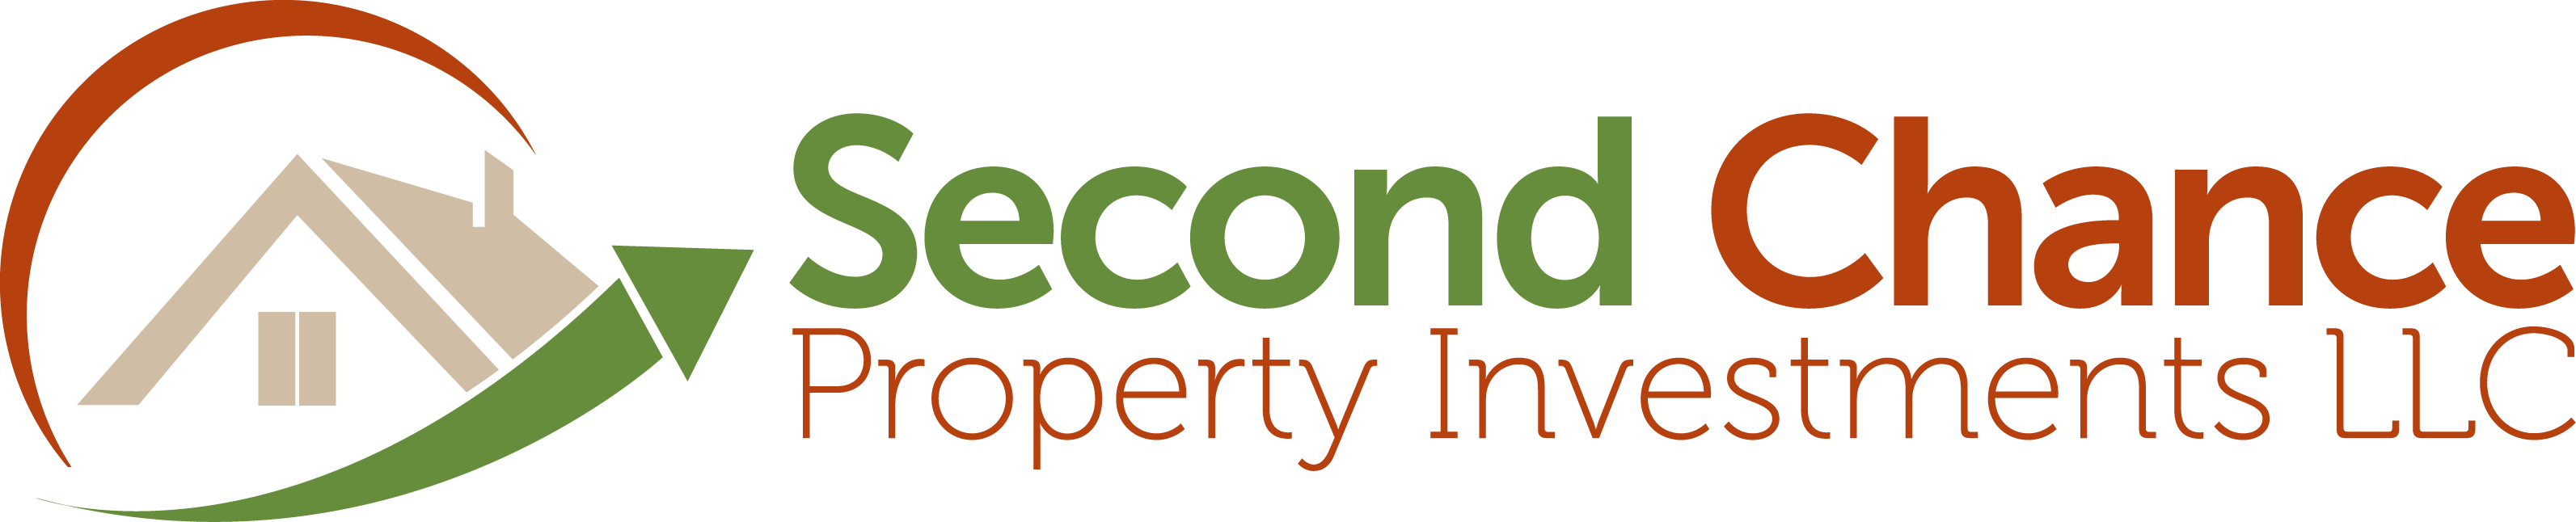 Second Chance Property Investments LLC